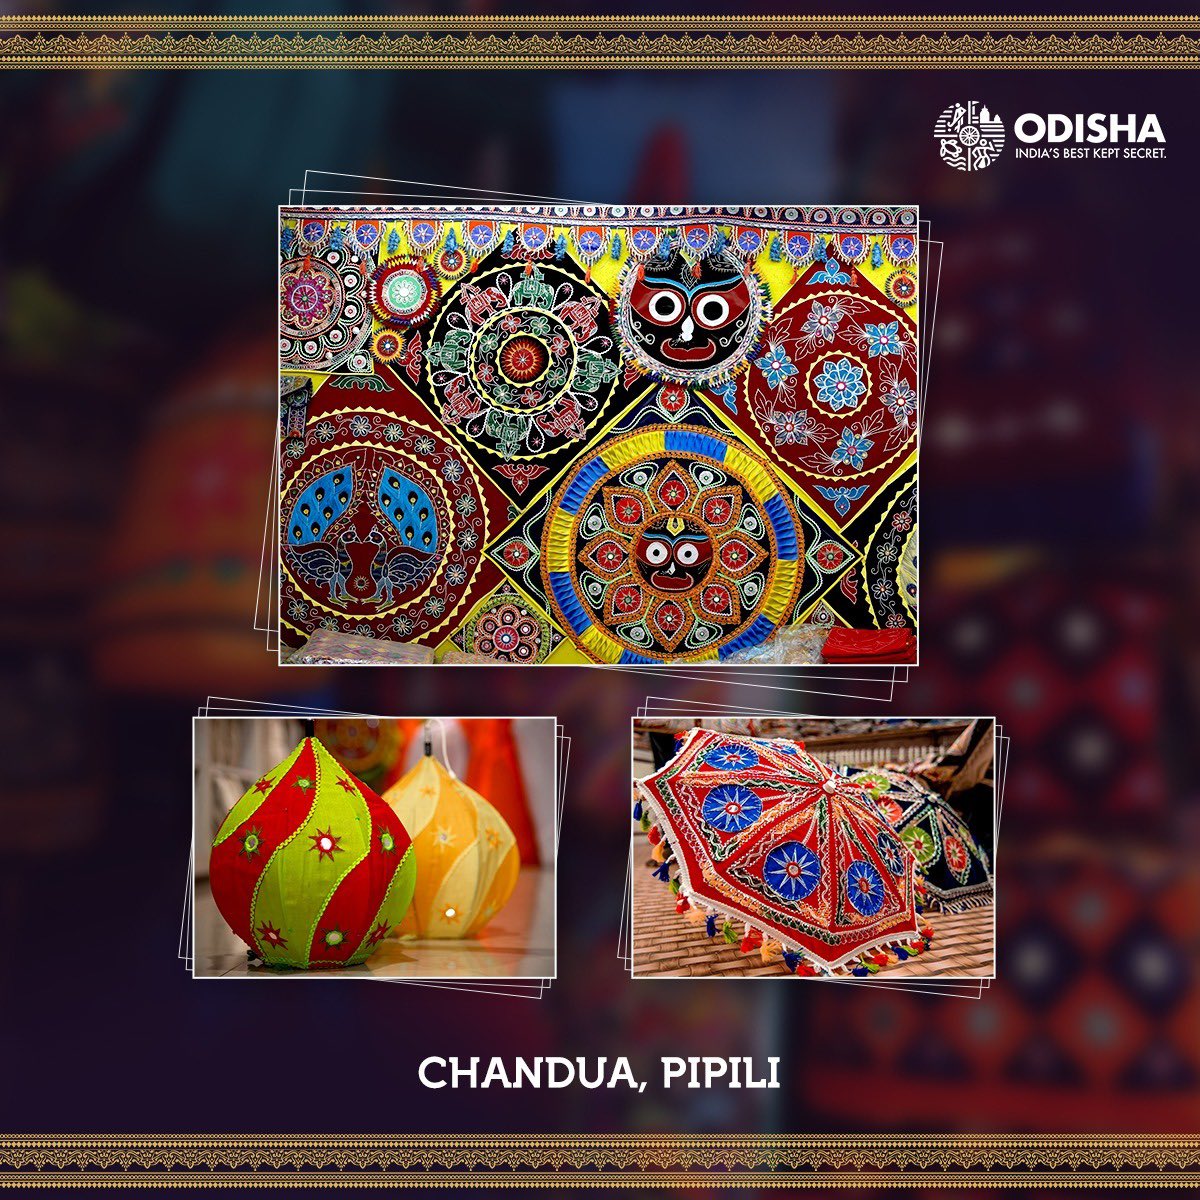 'Chandua', a beautiful applique artform believed to have started in 17th century, finds its origin in a quaint village of Pipili in Puri. From umbrellas to cushion covers and wall hangings to canopies, add a fine Chandua craft to elevate your home decor. Check out some…